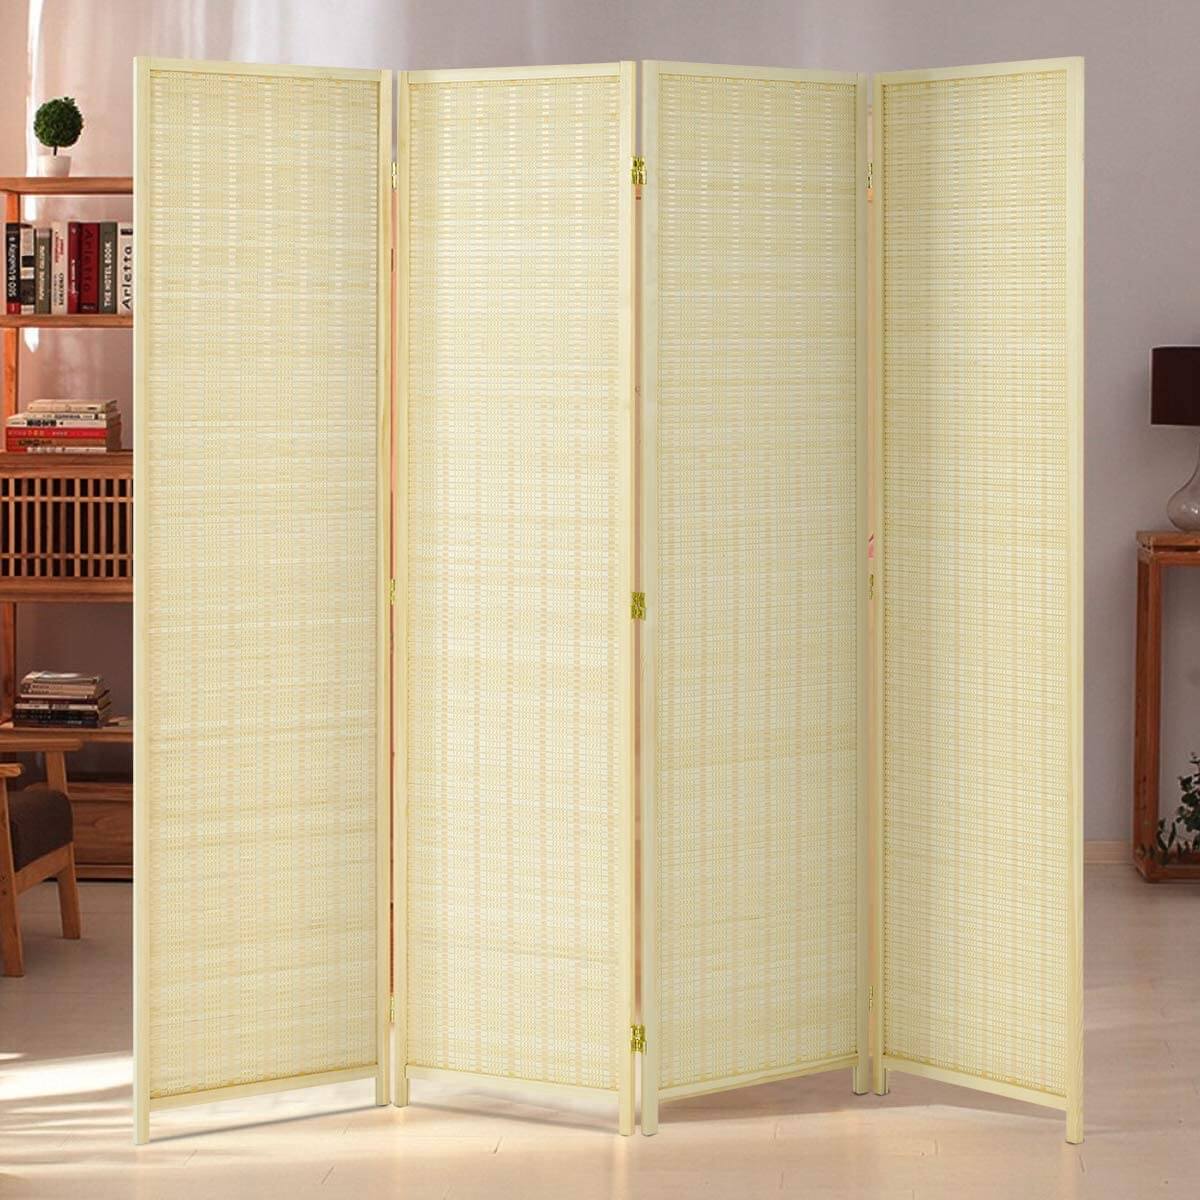 Esright 4 Panel Bamboo Room Divider, 6 Ft Tall Folding Privacy Screen ...